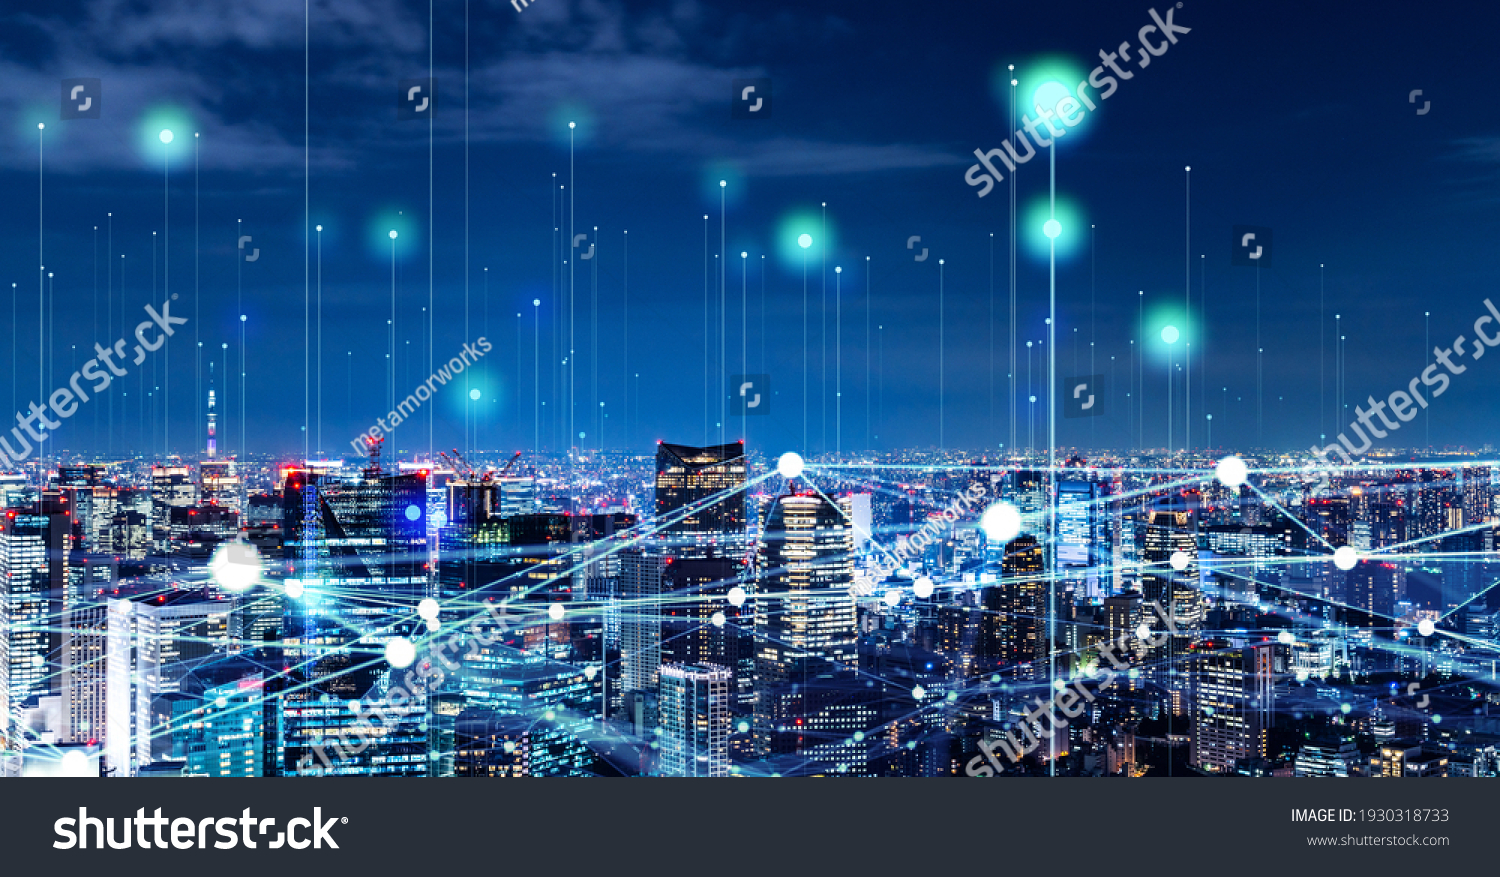 Modern cityscape and communication network concept. Telecommunication. IoT (Internet of Things). ICT (Information communication Technology). 5G. Smart city. Digital transformation. #1930318733